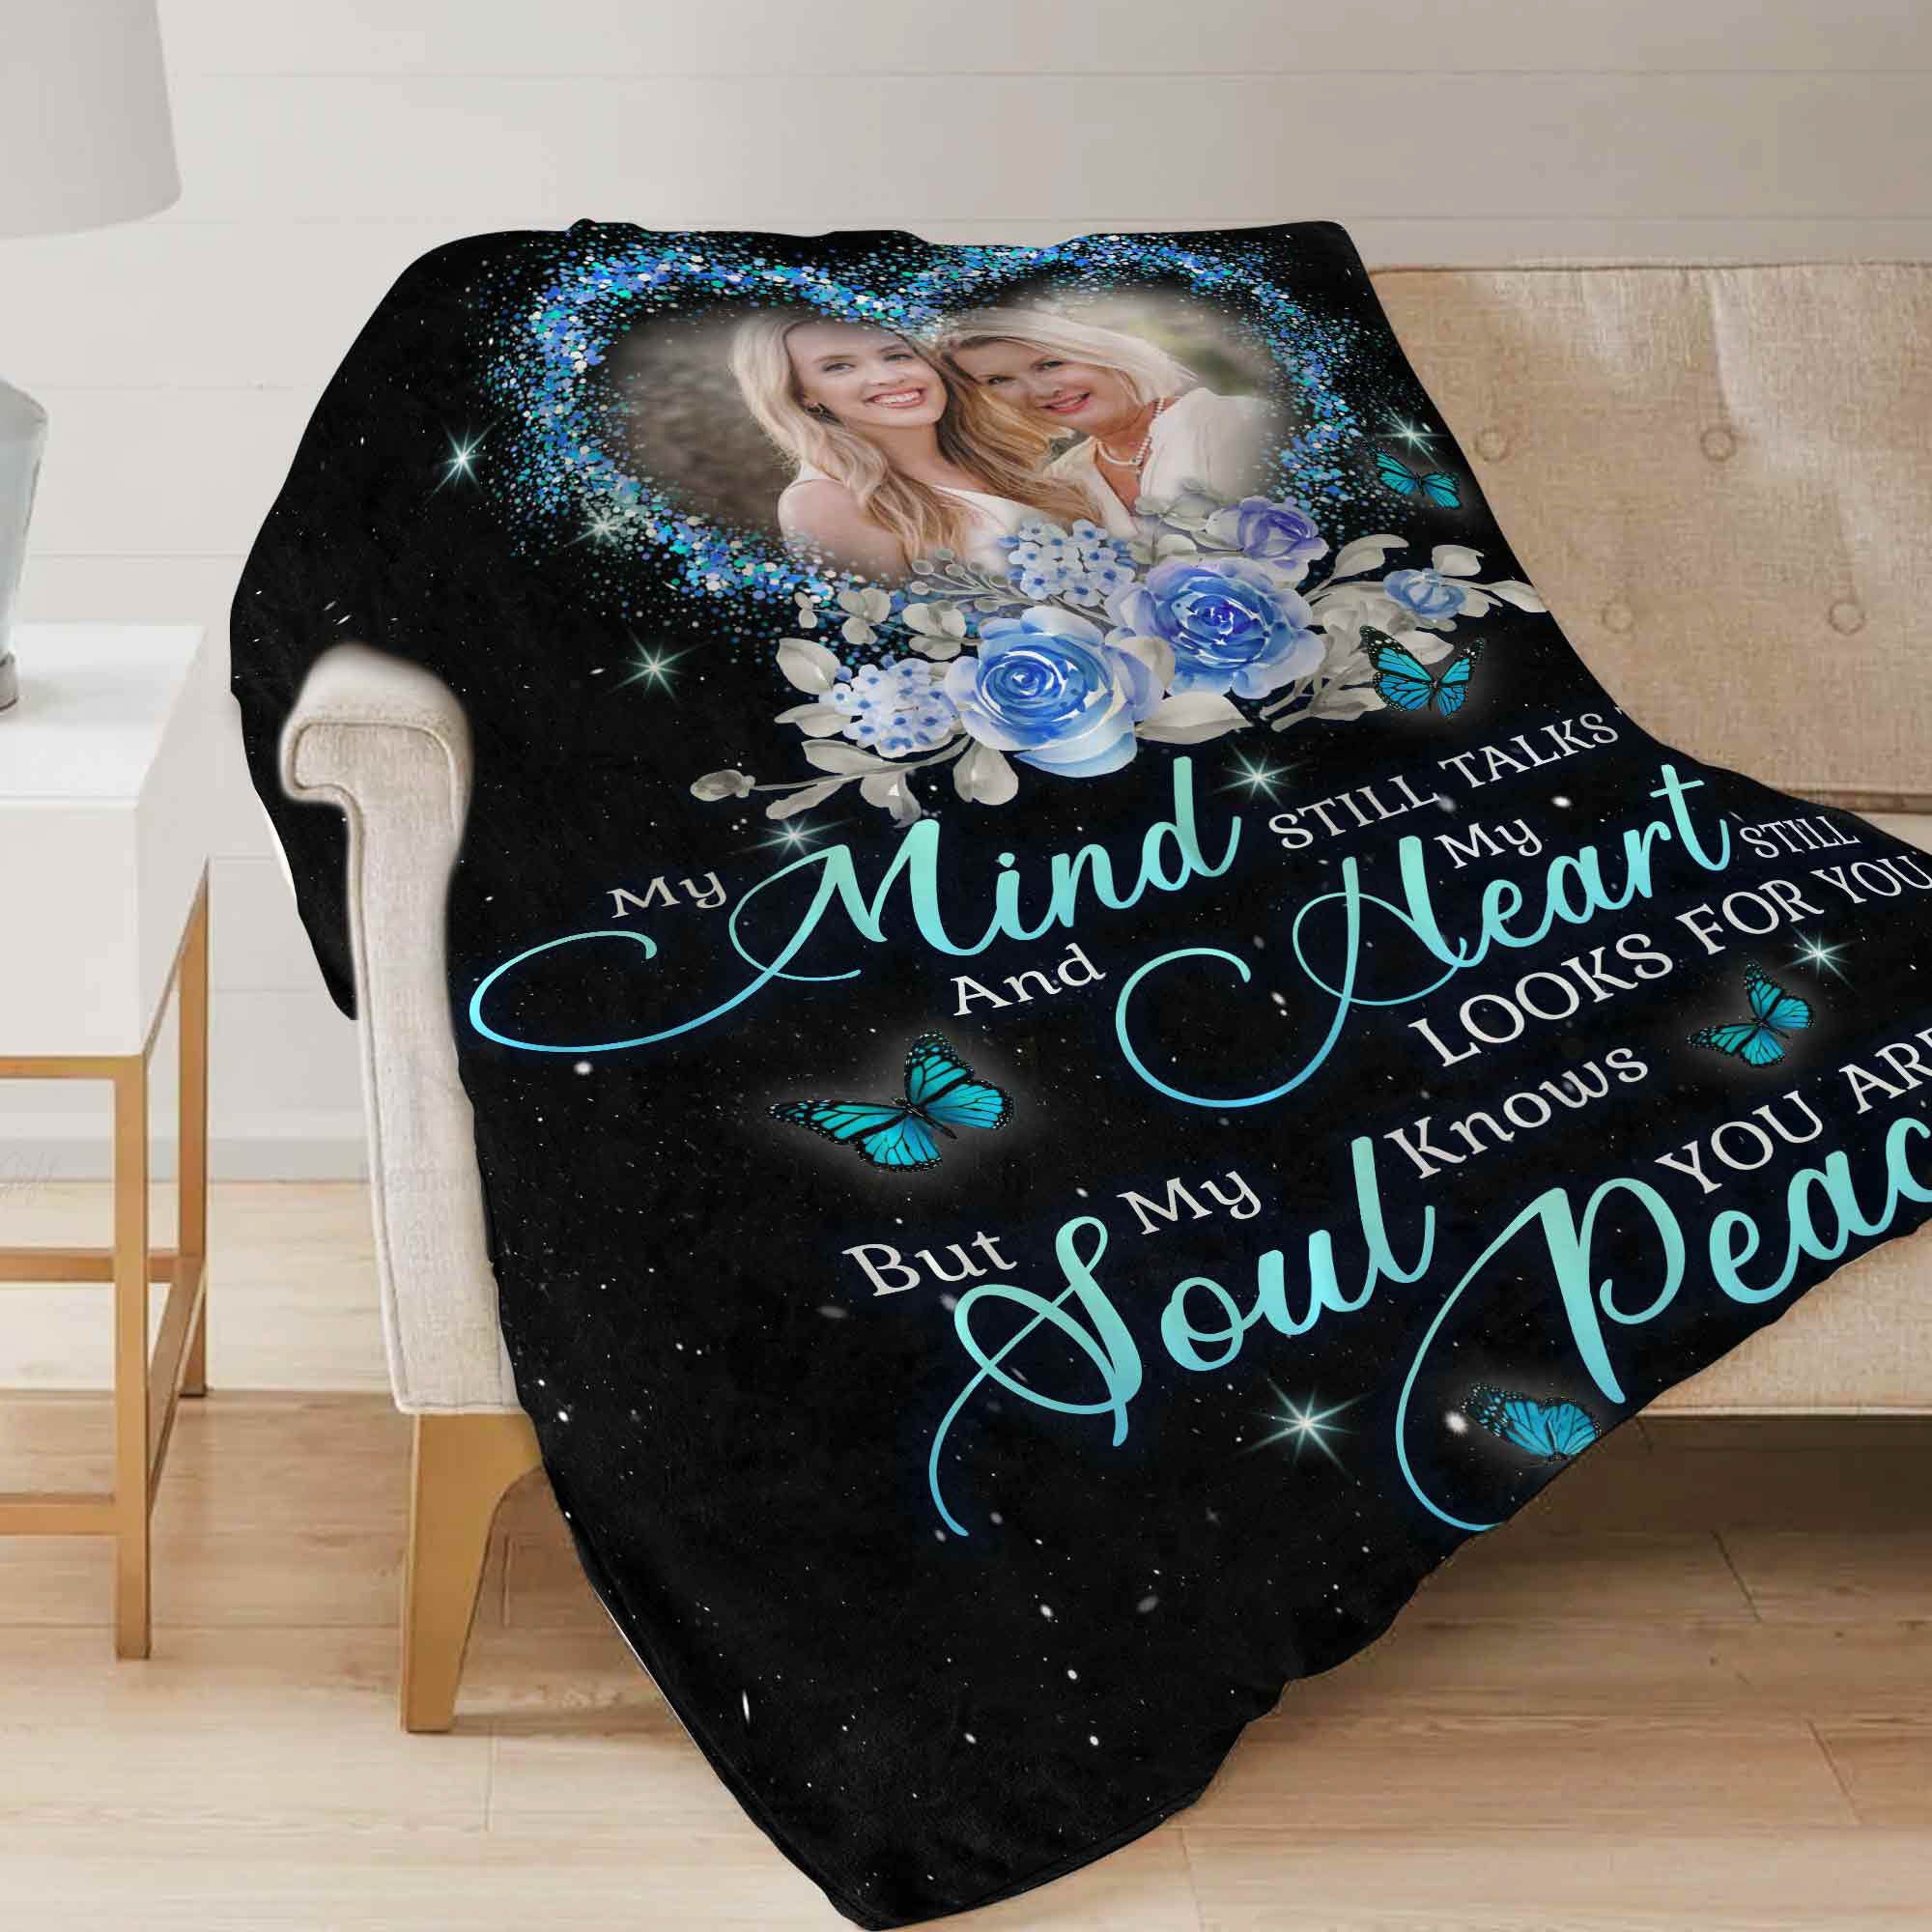 memory blanket with pictures